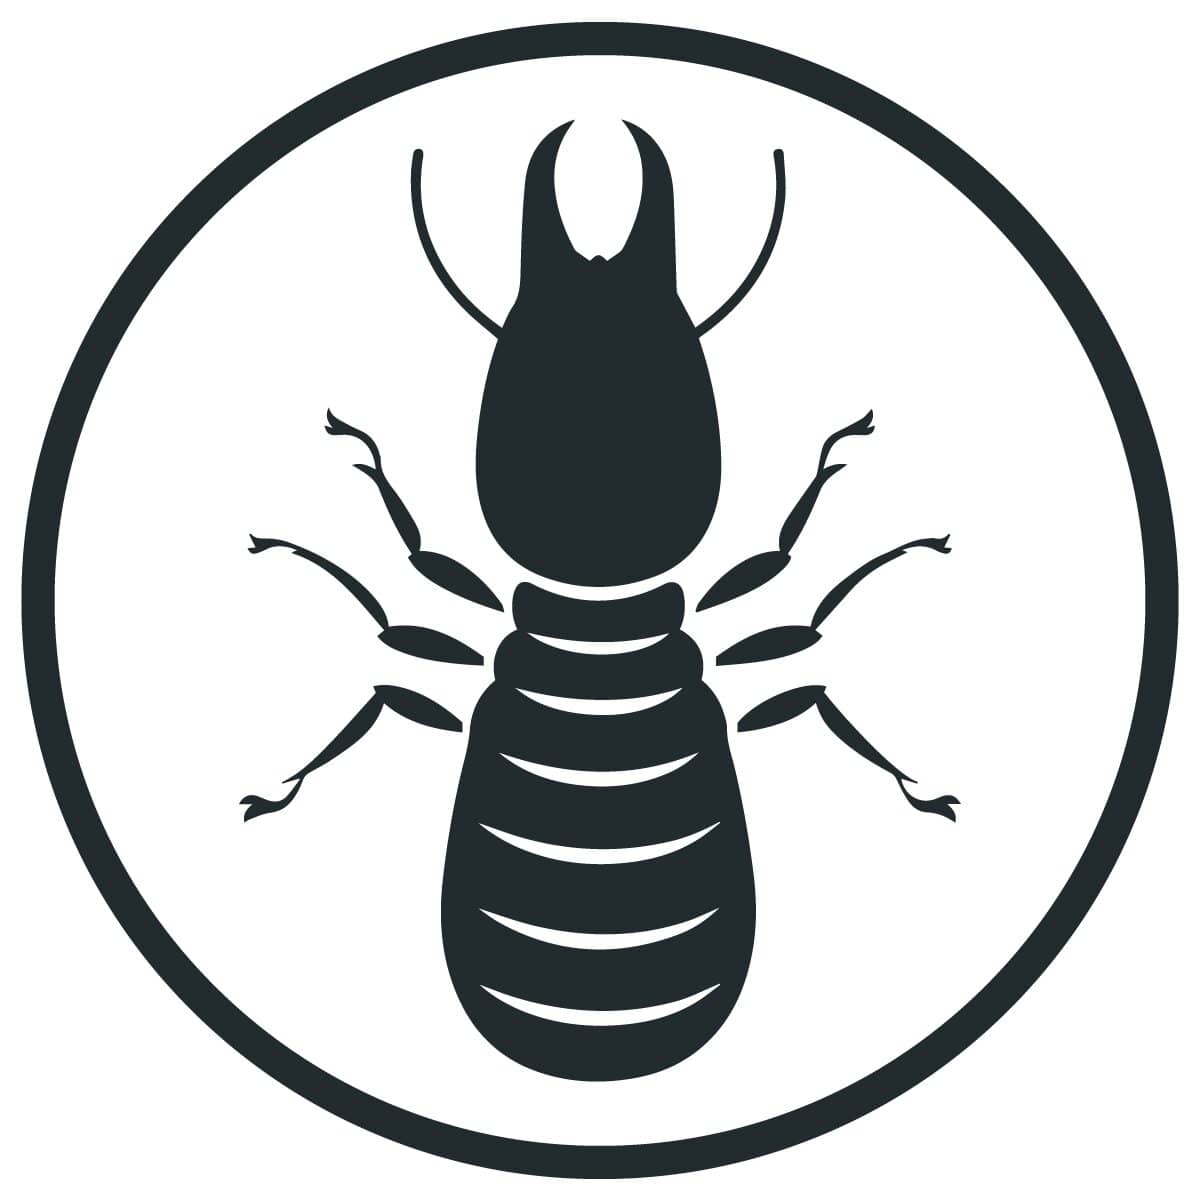 Termite pest control service in sydney for homes and businesses